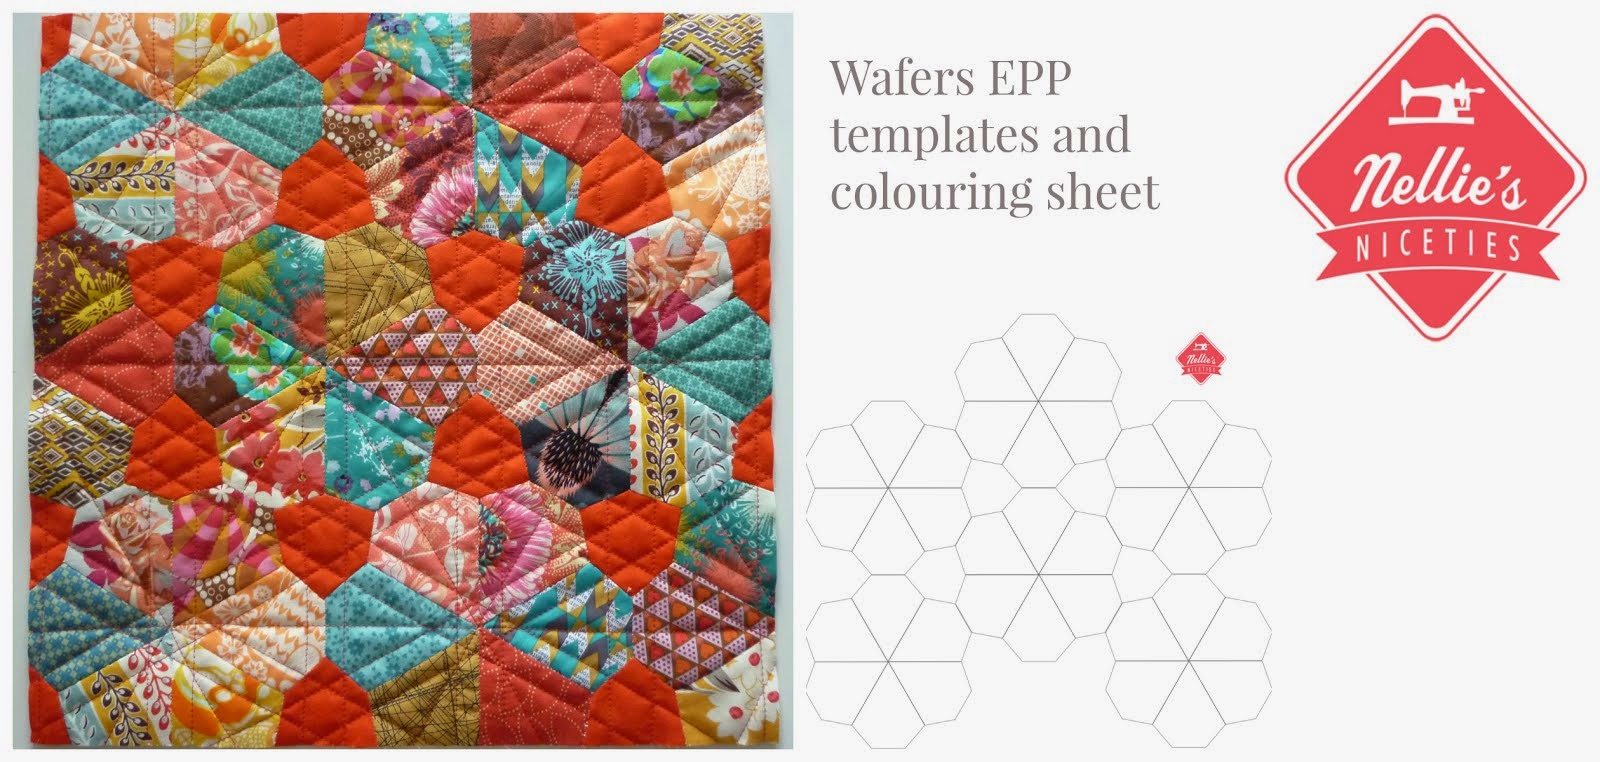 Wafers EPP templates